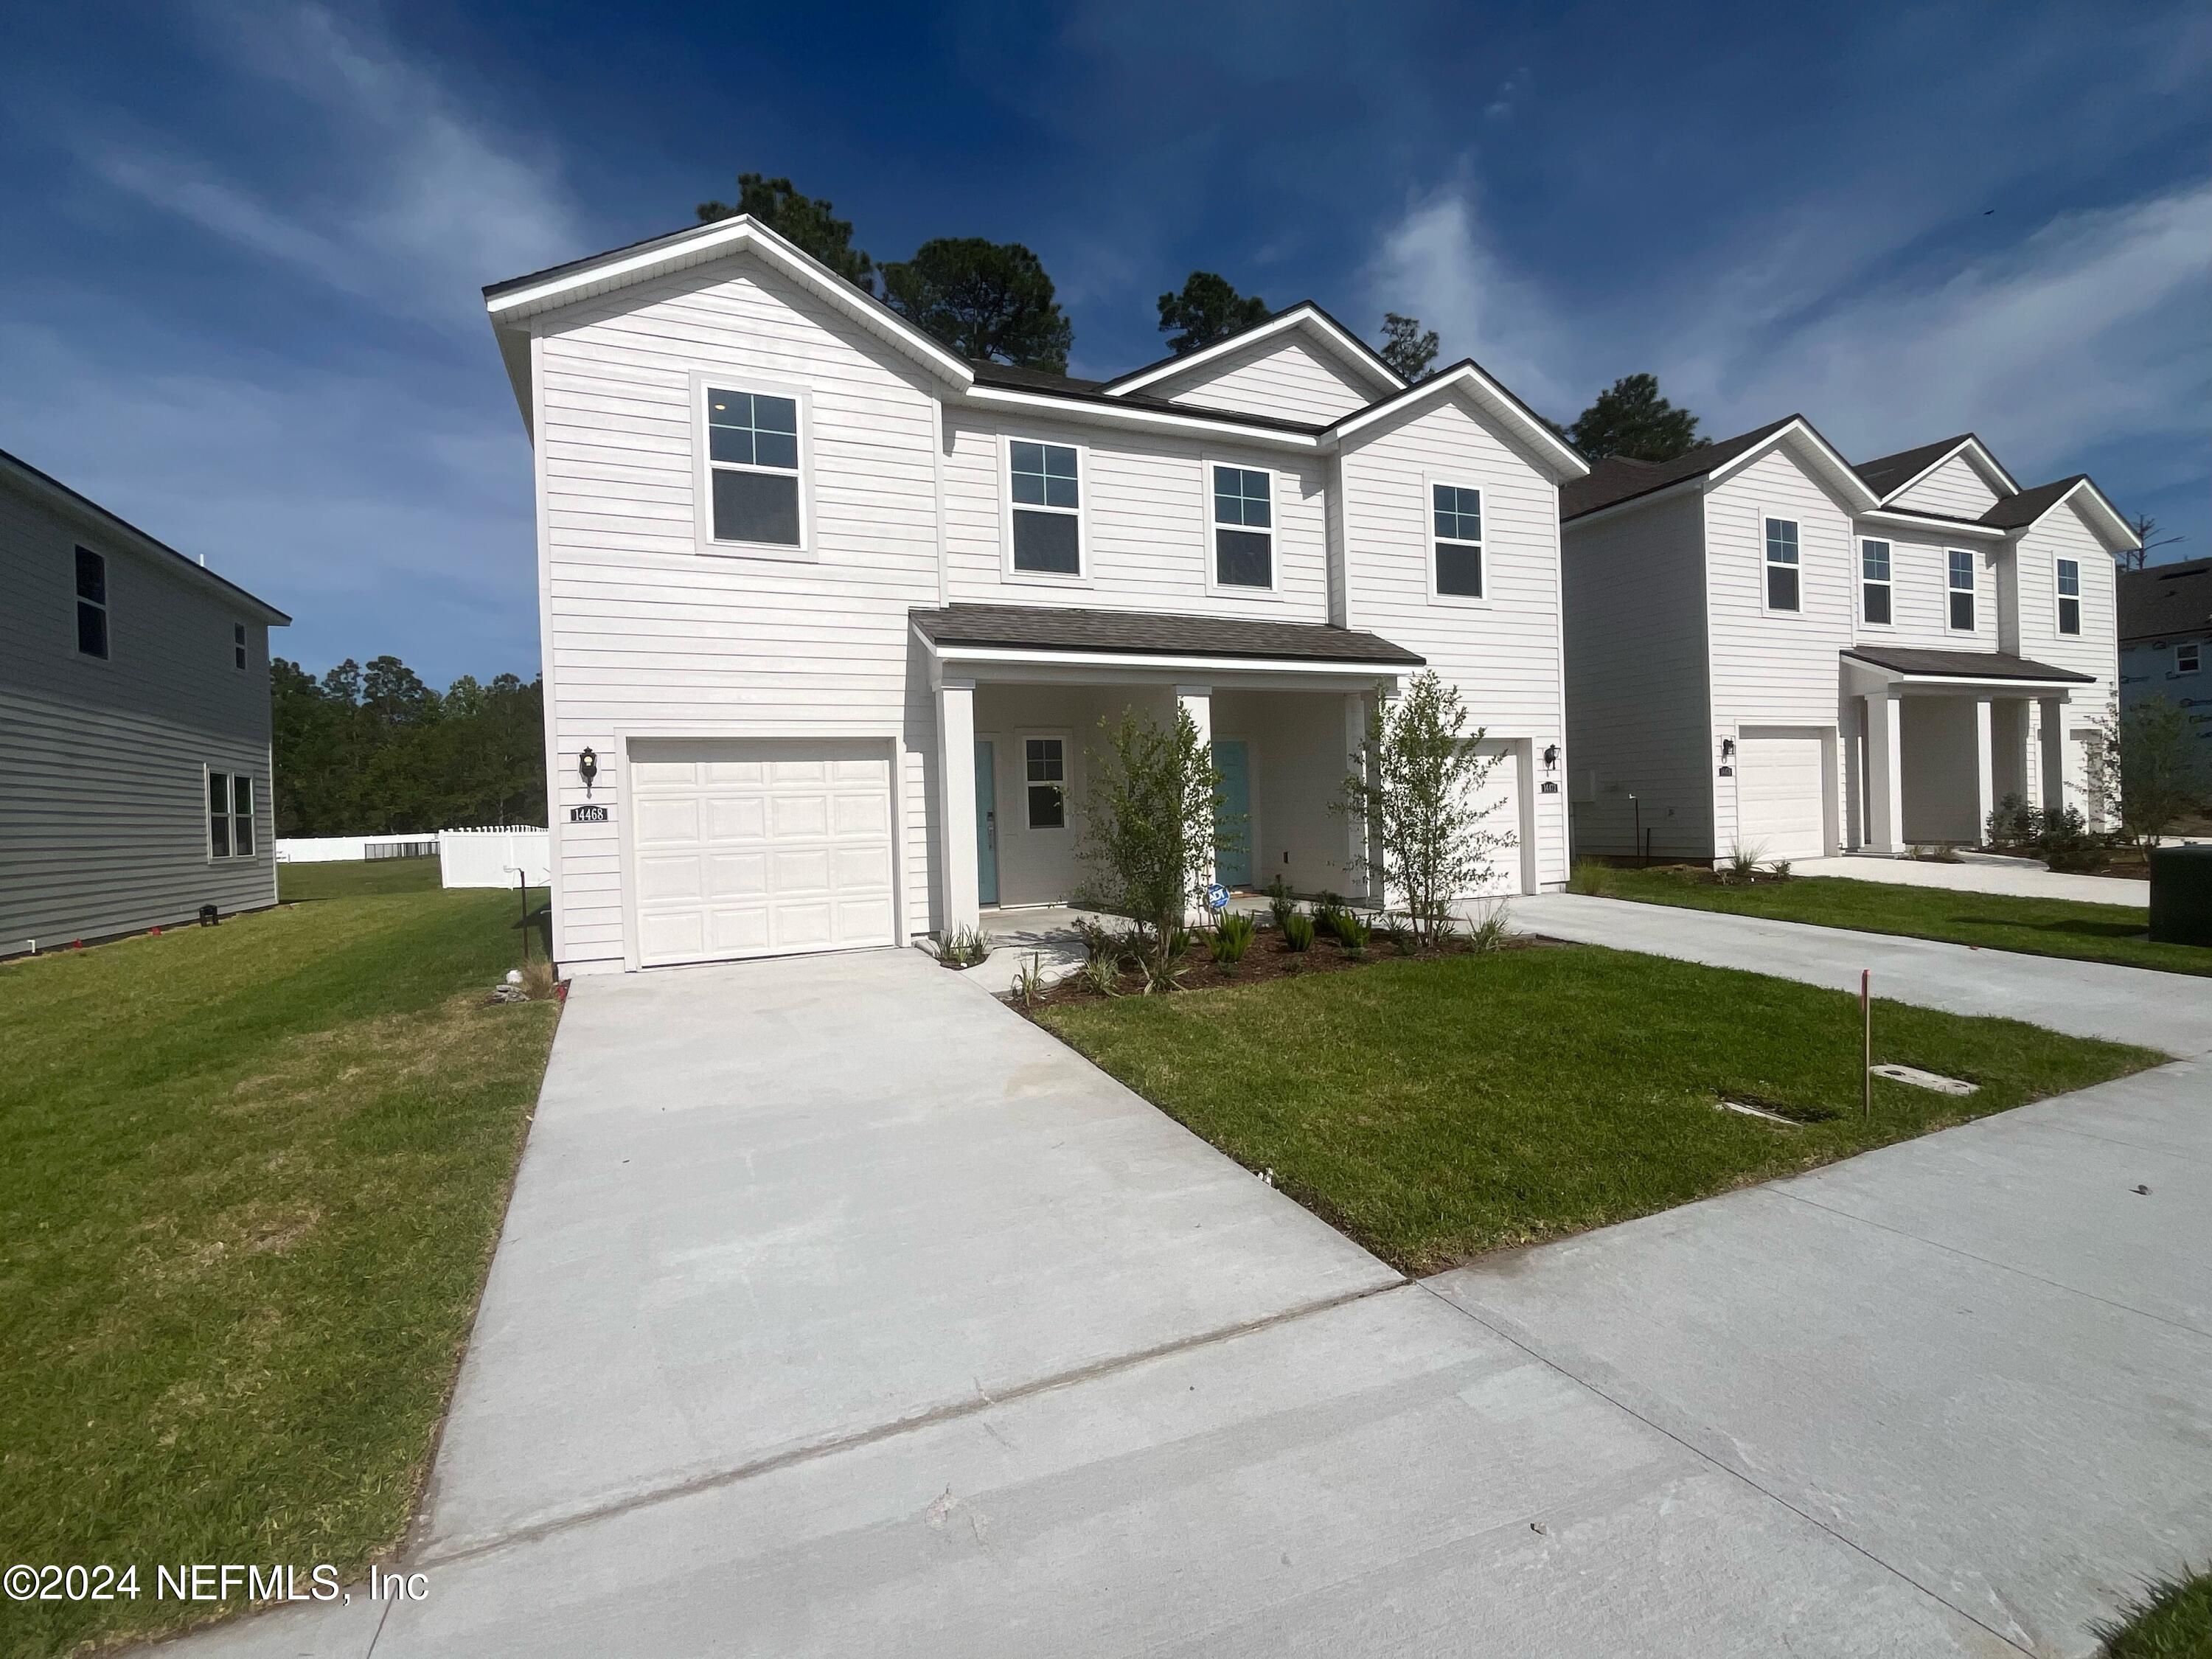 Jacksonville, FL home for sale located at 14448 Macadamia Ln. Unit 260, Jacksonville, FL 32218